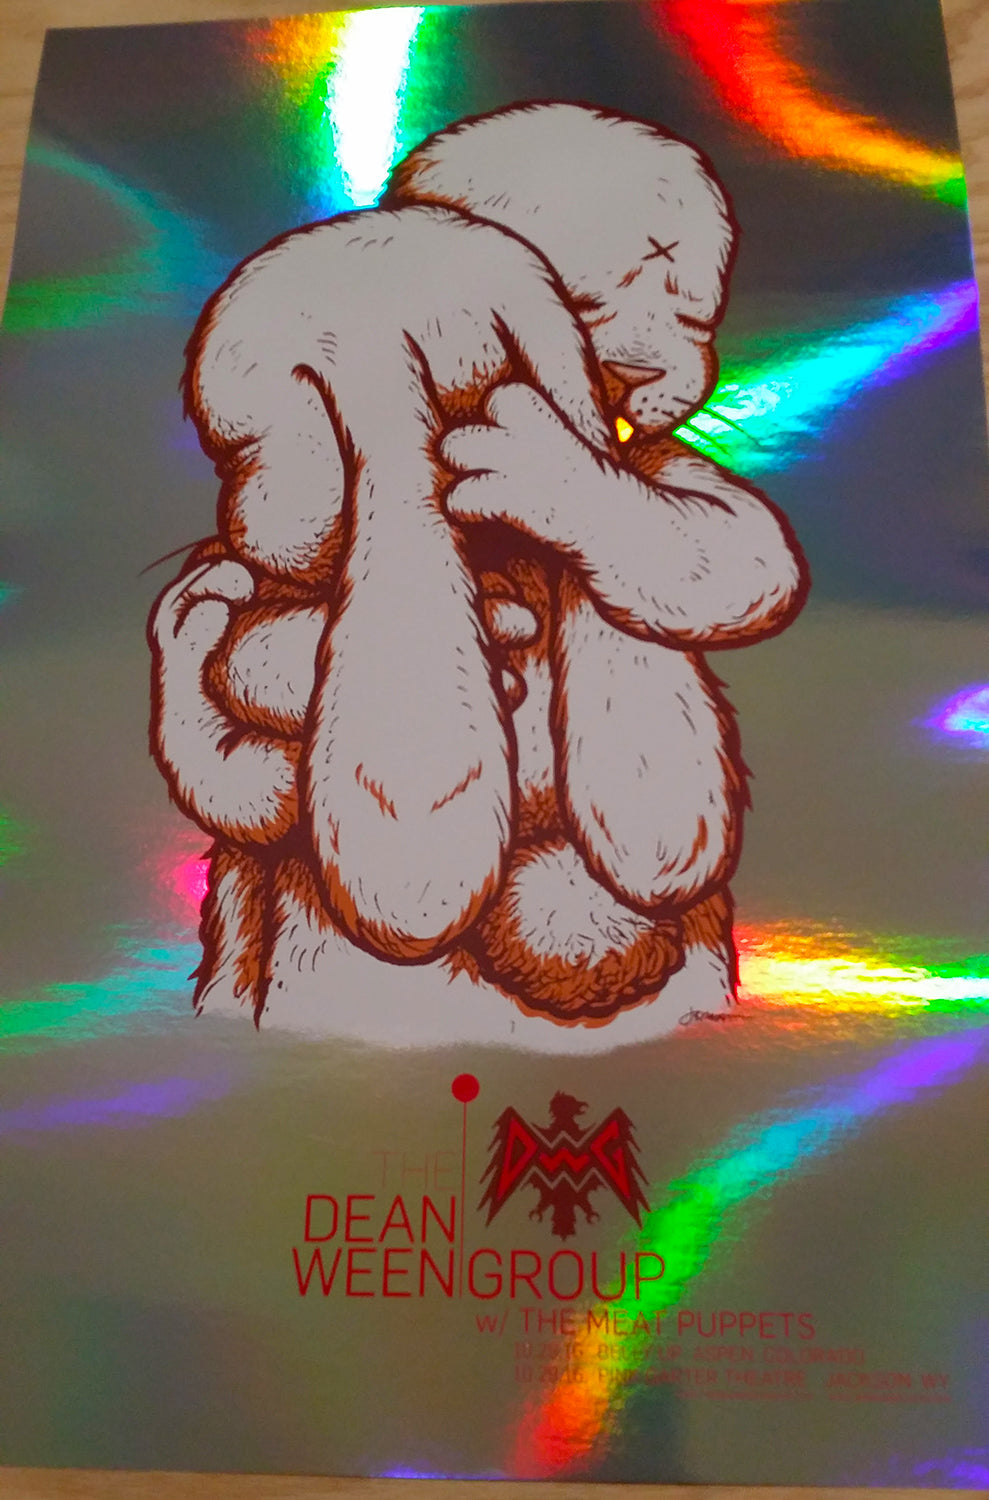 Dean Ween Group (Aspen, Co. / Jackson, WY. 2016) Artist Edition and Holographic Foil Variant